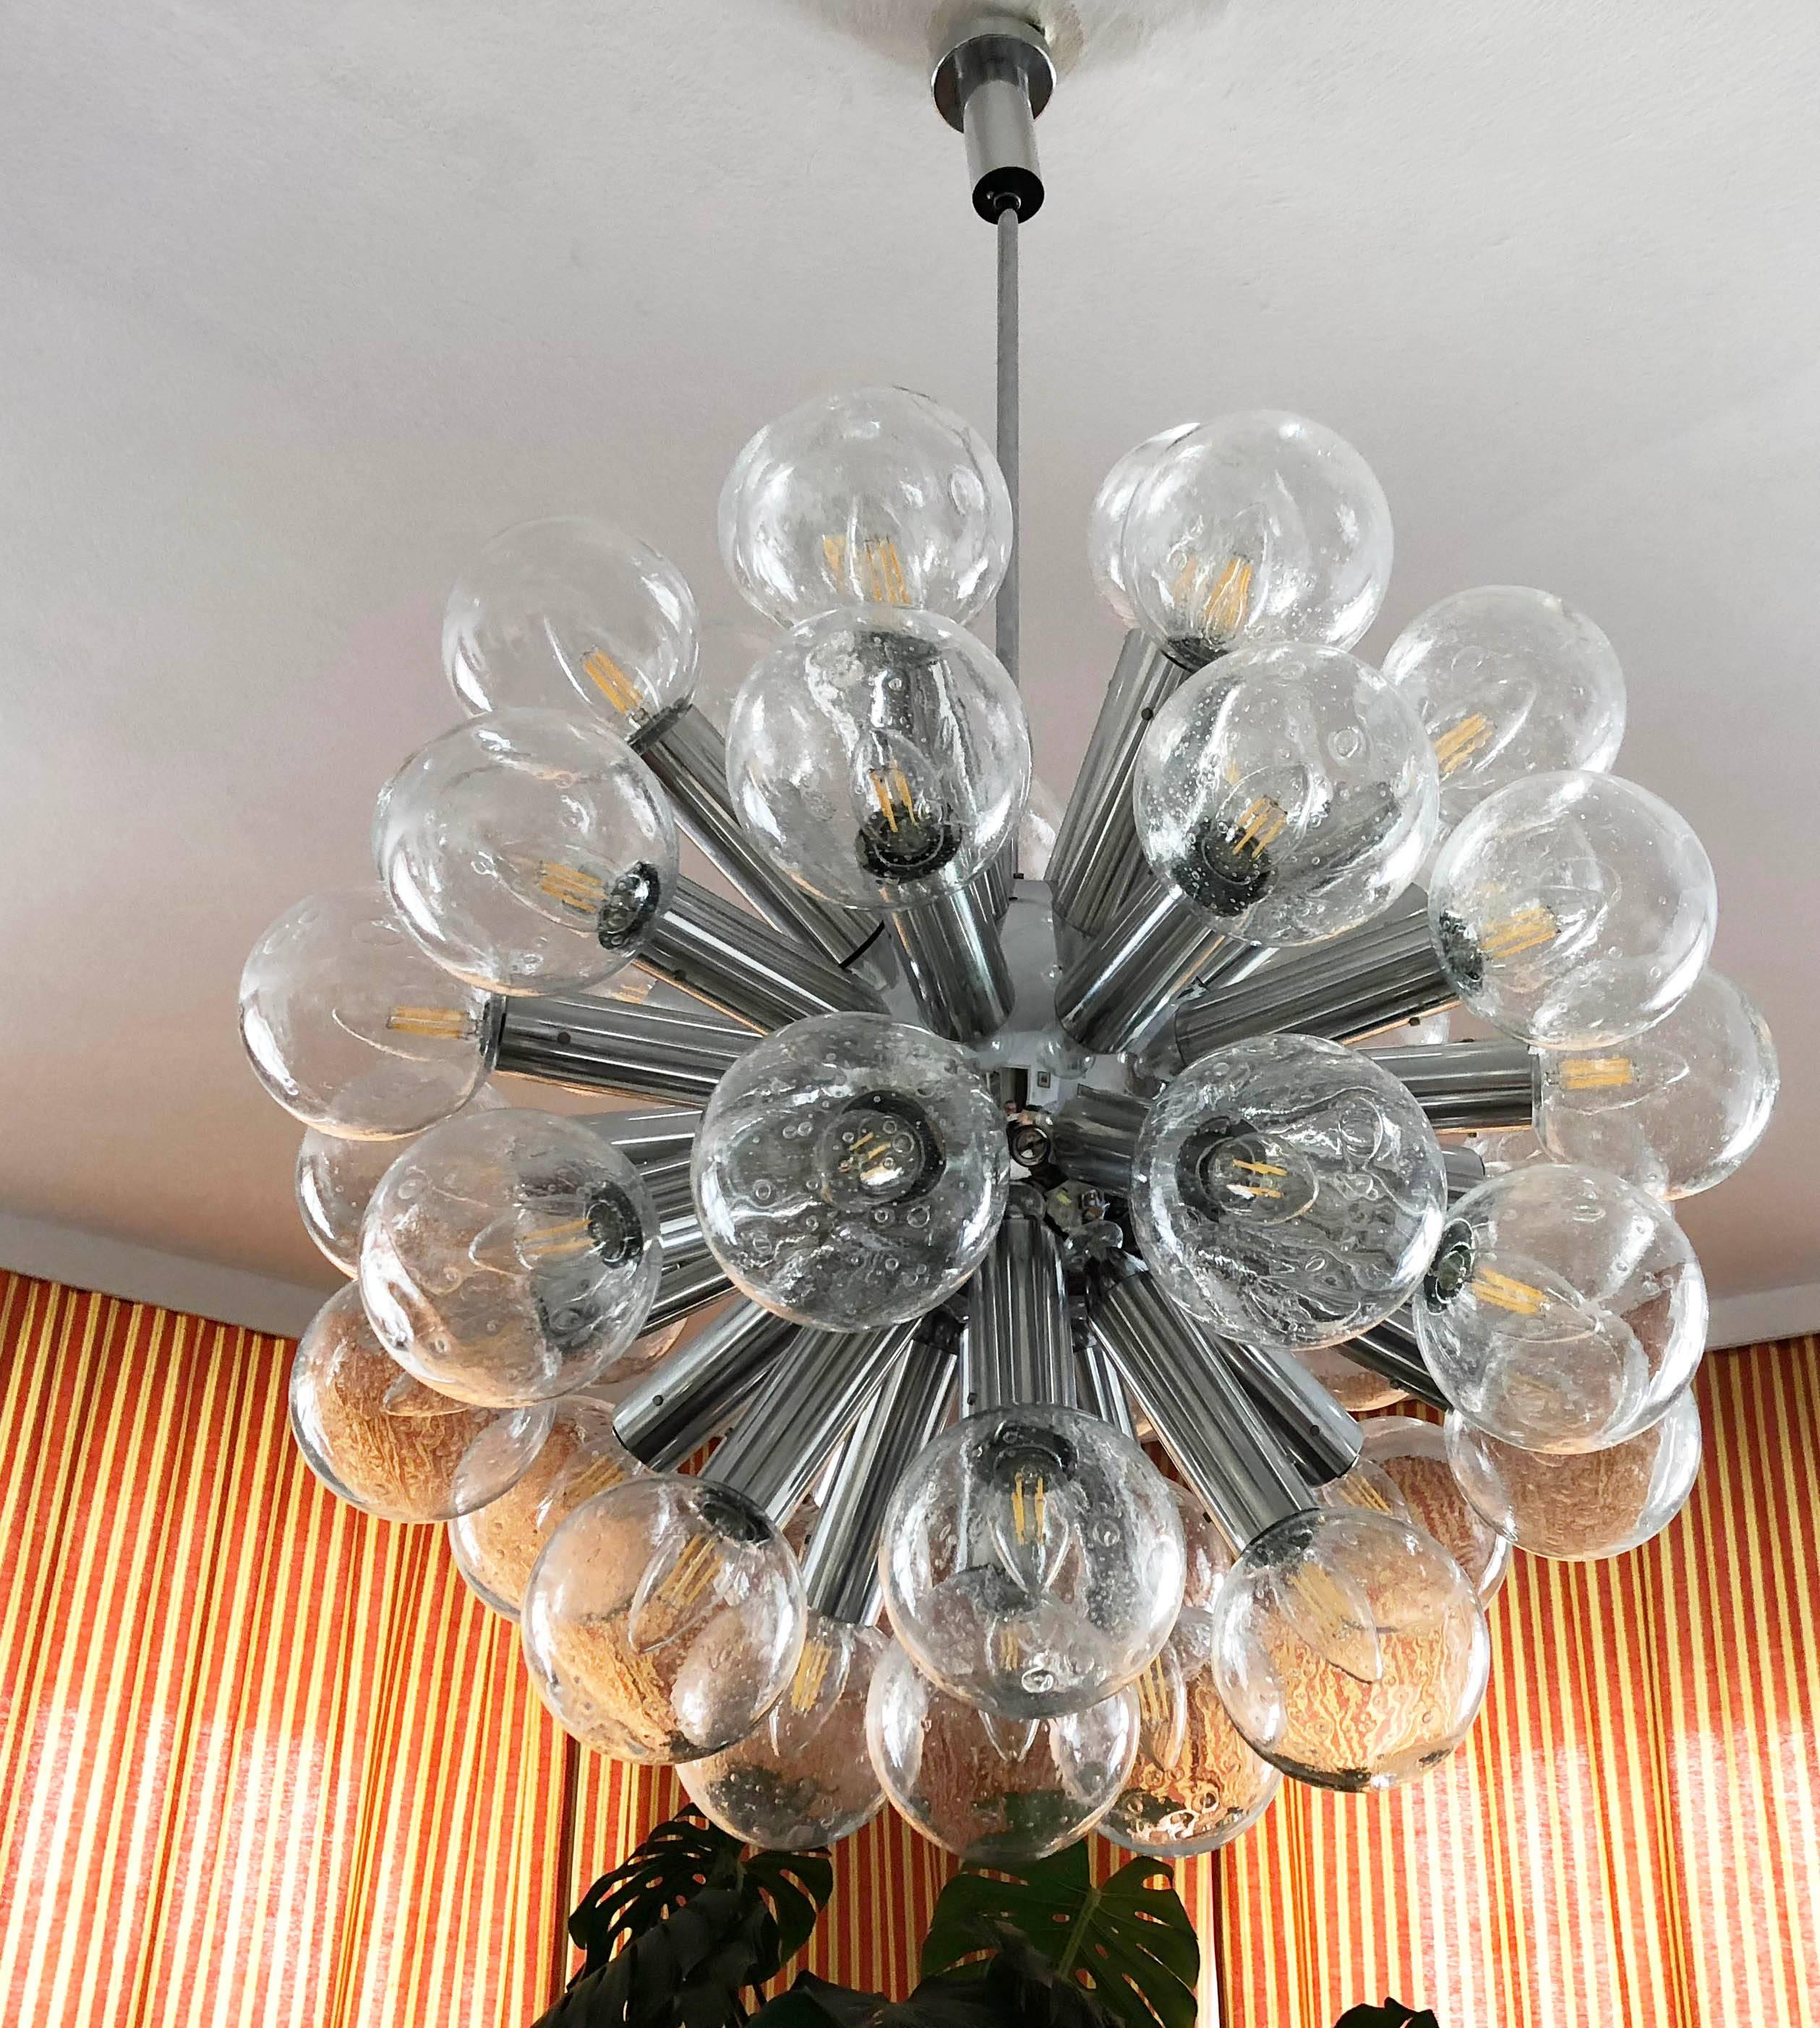 Beautiful chandelier made of anodized aluminum with 43 arms and handblown glass shades, each fitted with E14 sockets. Made by. J.T. Kalmar in the 1970s.